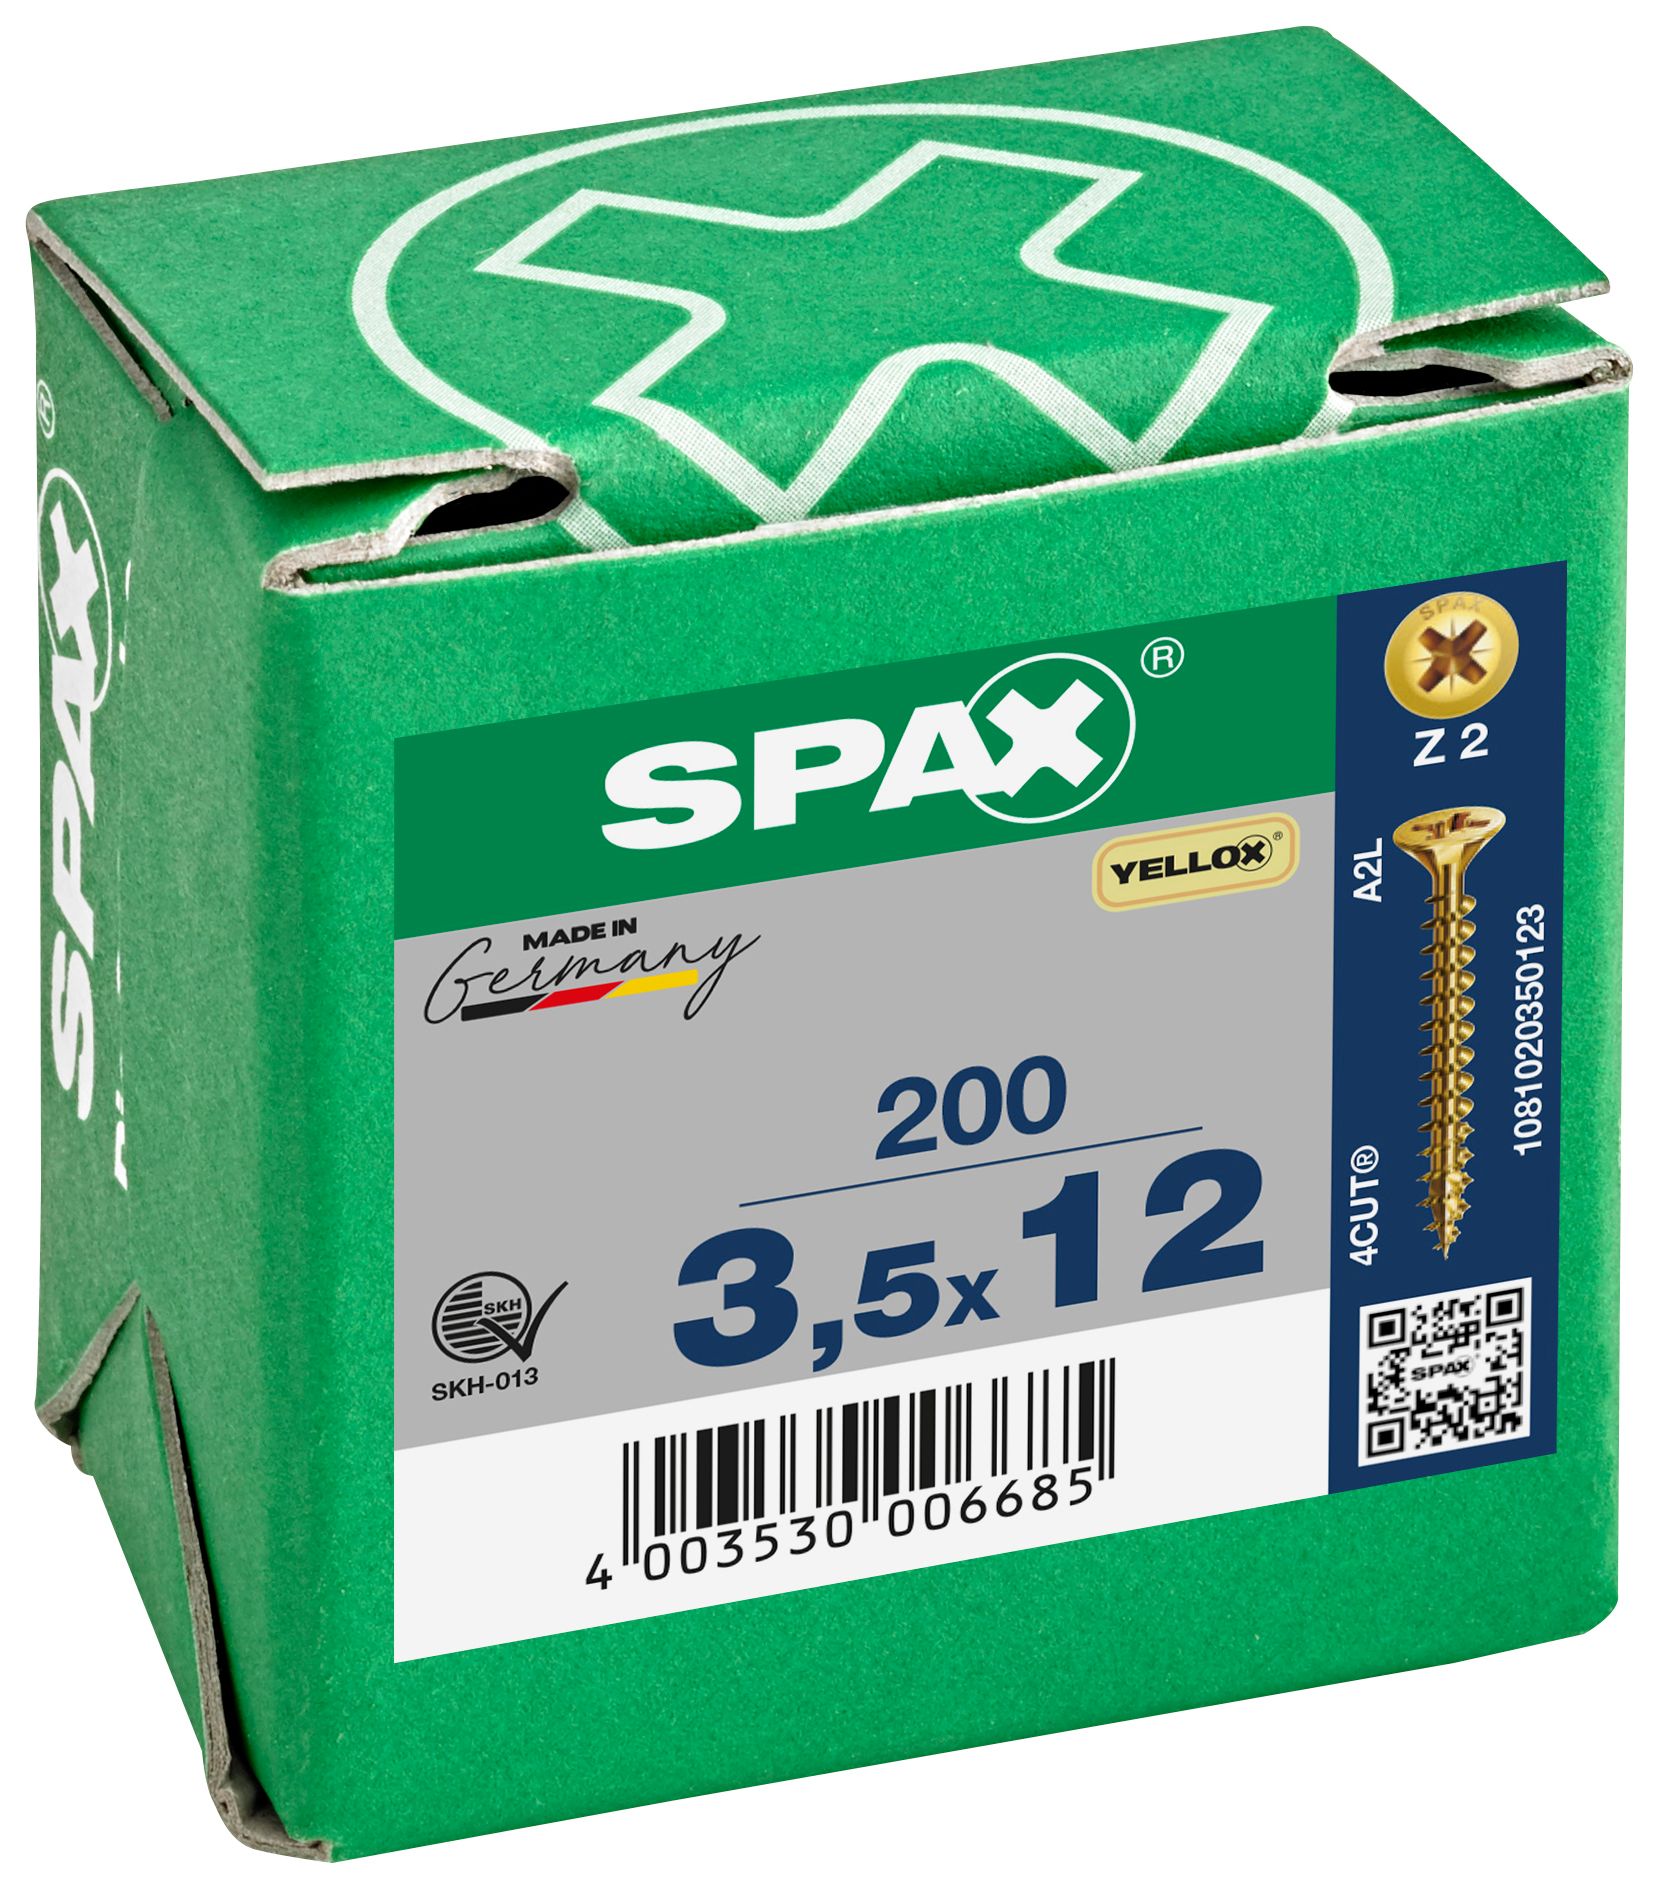 Image of Spax Pz Countersunk Yellox Screws - 3.5x12mm Pack Of 200